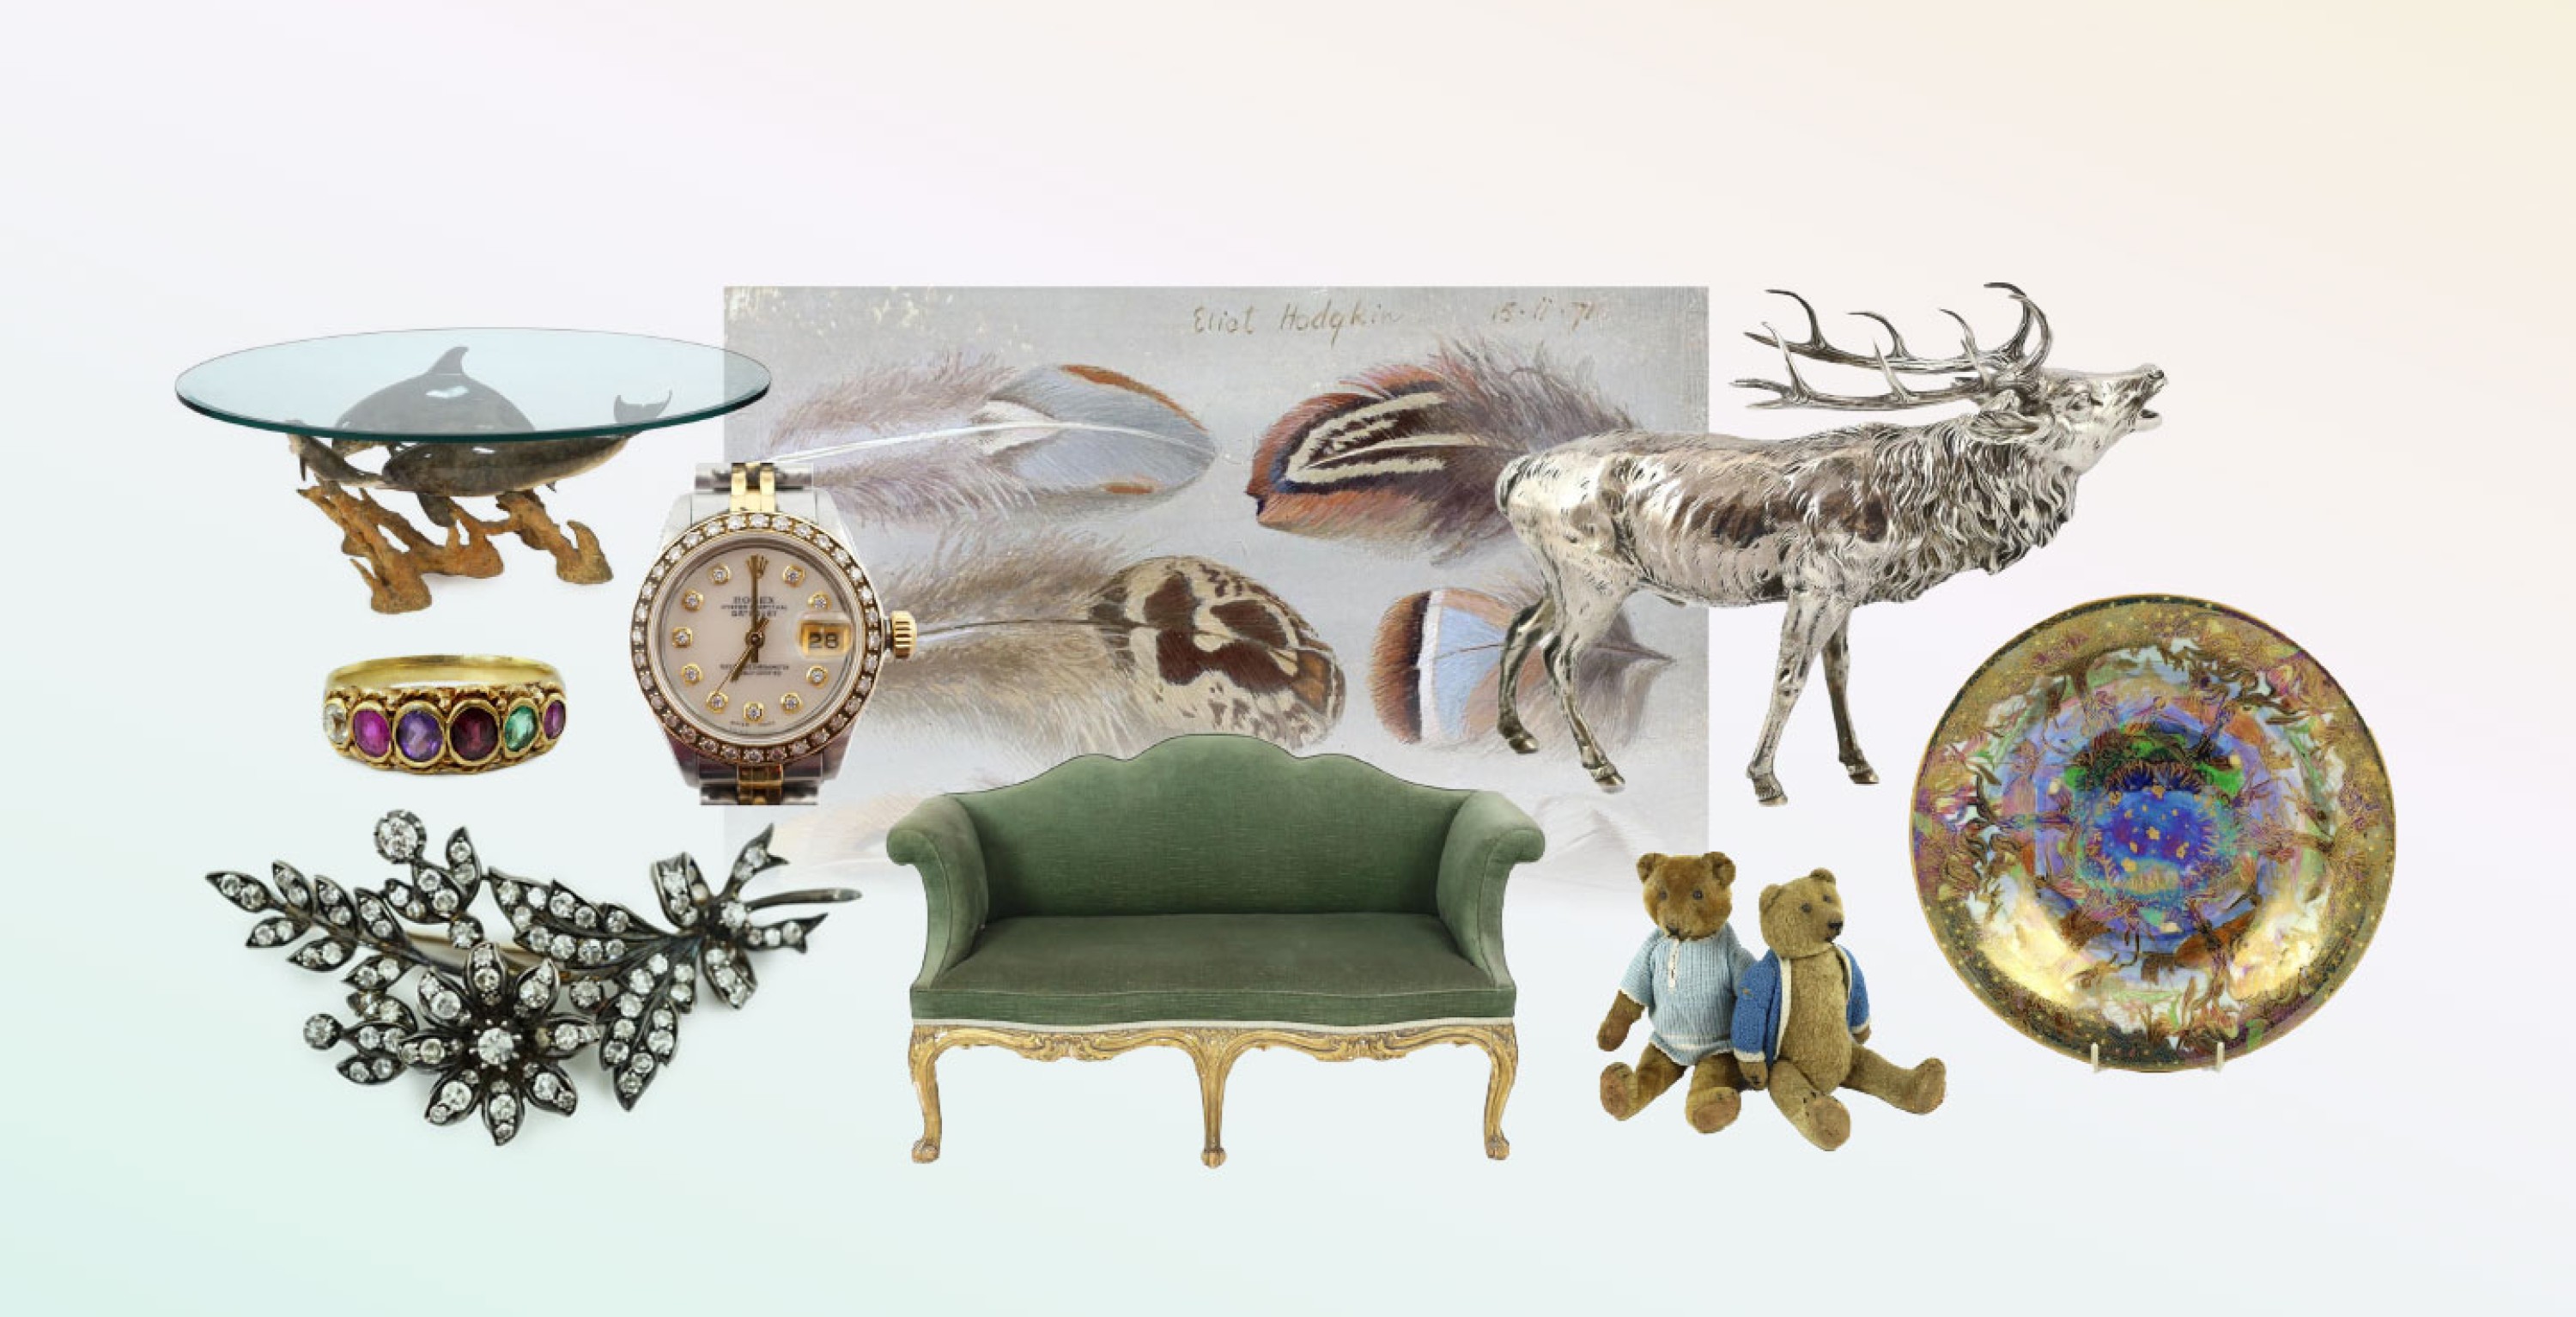 Robert Wyland (American, b.1956), a patinated bronze group ‘Dolphin Reef’  A lady’s 1980’s stainless steel and gold Rolex Oyster Perpetual Datejust wrist watch  Eliot Hodgkin (English, 1905-1987), Six Feathers, tempera on card